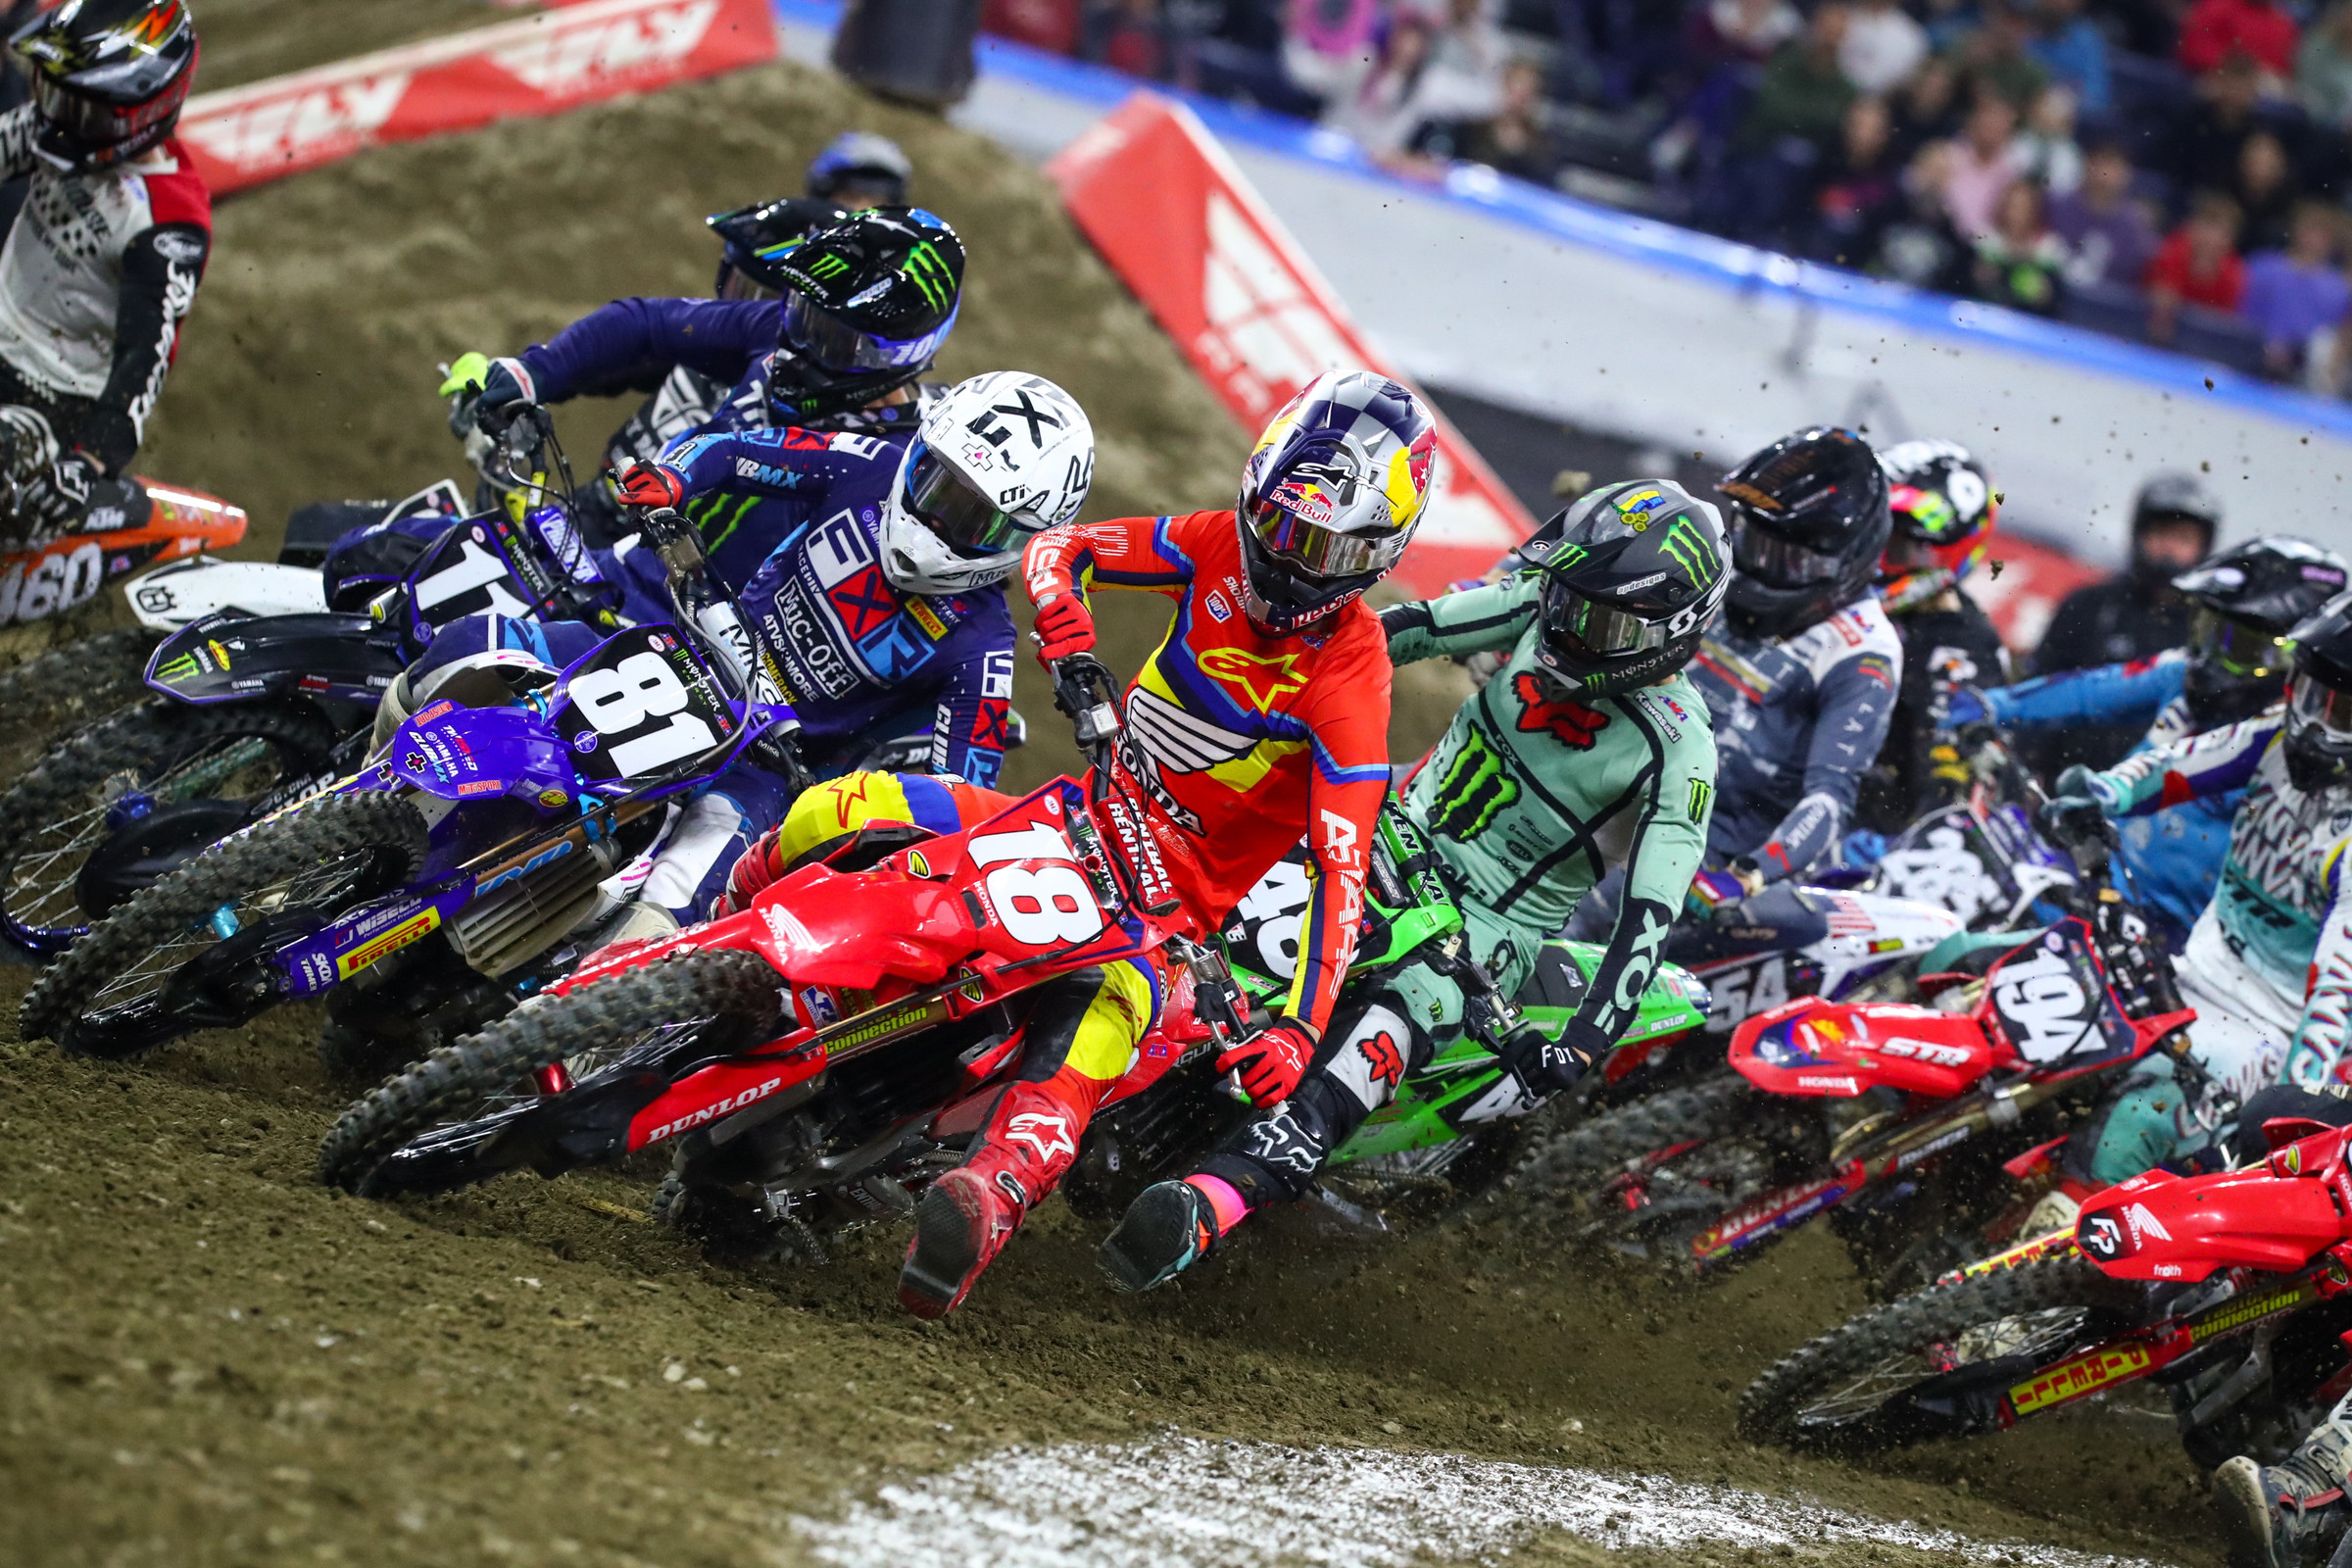 Race Report from the 2022 Indianapolis Supercross